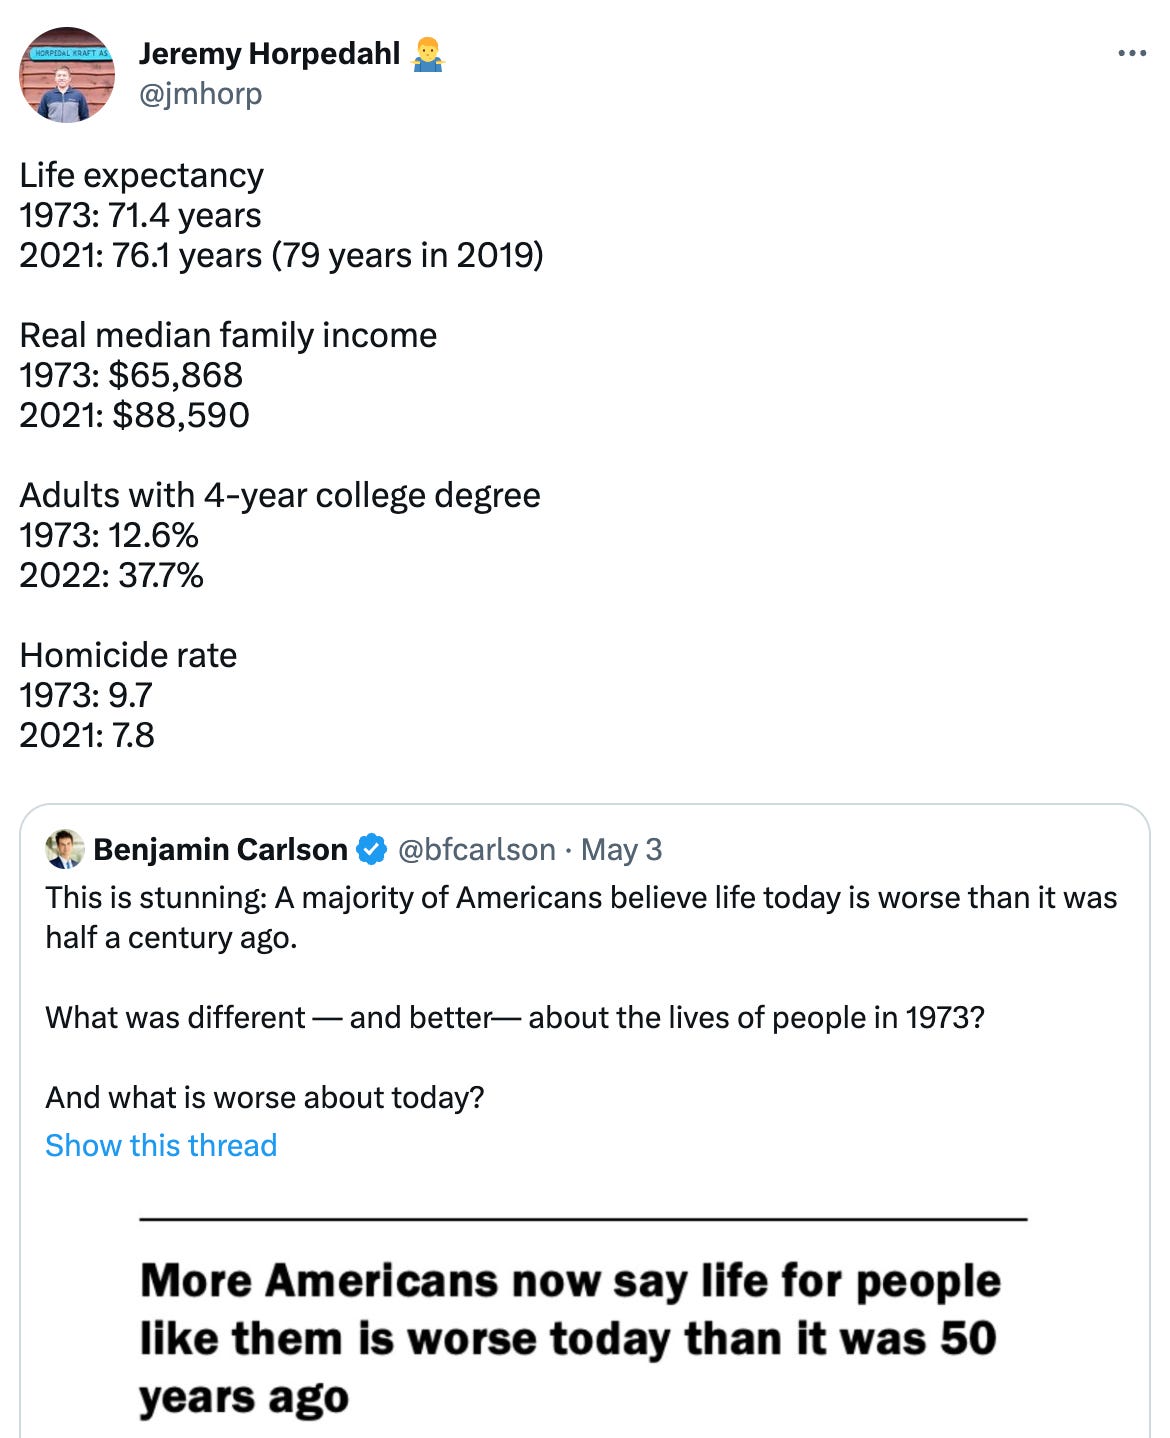  See new Tweets Conversation Jeremy Horpedahl 🤷‍♂️ @jmhorp Life expectancy 1973: 71.4 years 2021: 76.1 years (79 years in 2019)  Real median family income 1973: $65,868 2021: $88,590  Adults with 4-year college degree 1973: 12.6% 2022: 37.7%  Homicide rate 1973: 9.7 2021: 7.8 Quote Tweet Benjamin Carlson @bfcarlson · May 3 This is stunning: A majority of Americans believe life today is worse than it was half a century ago.   What was different — and better— about the lives of people in 1973?   And what is worse about today? Show this thread